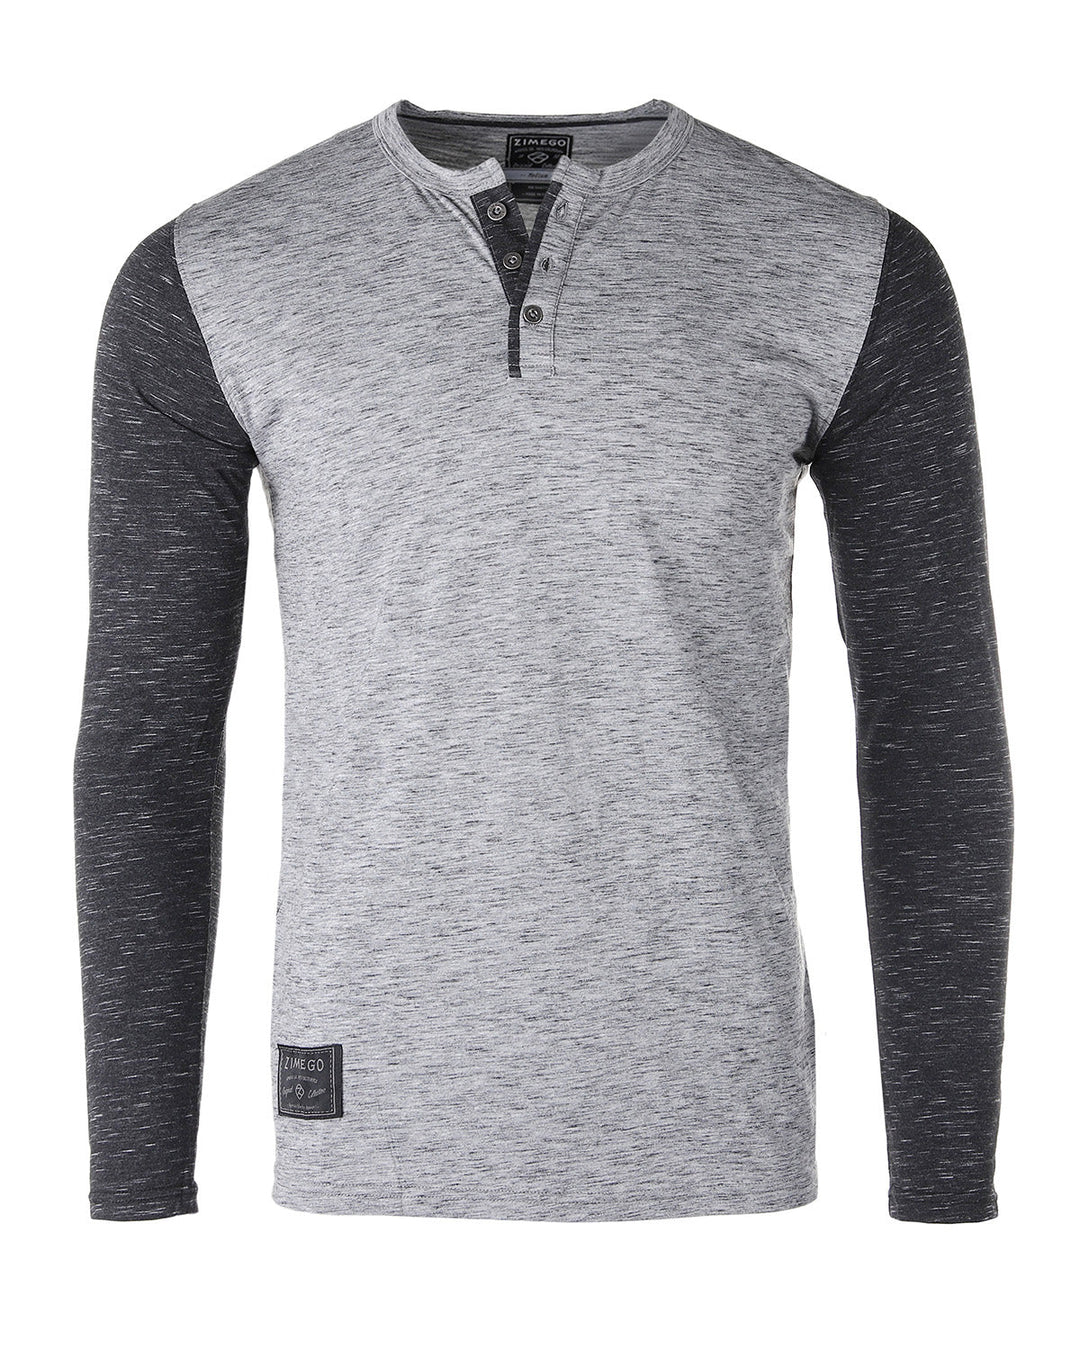 Contrast Grey Long Sleeve Casual Button Up Henley Athletic T Shirt